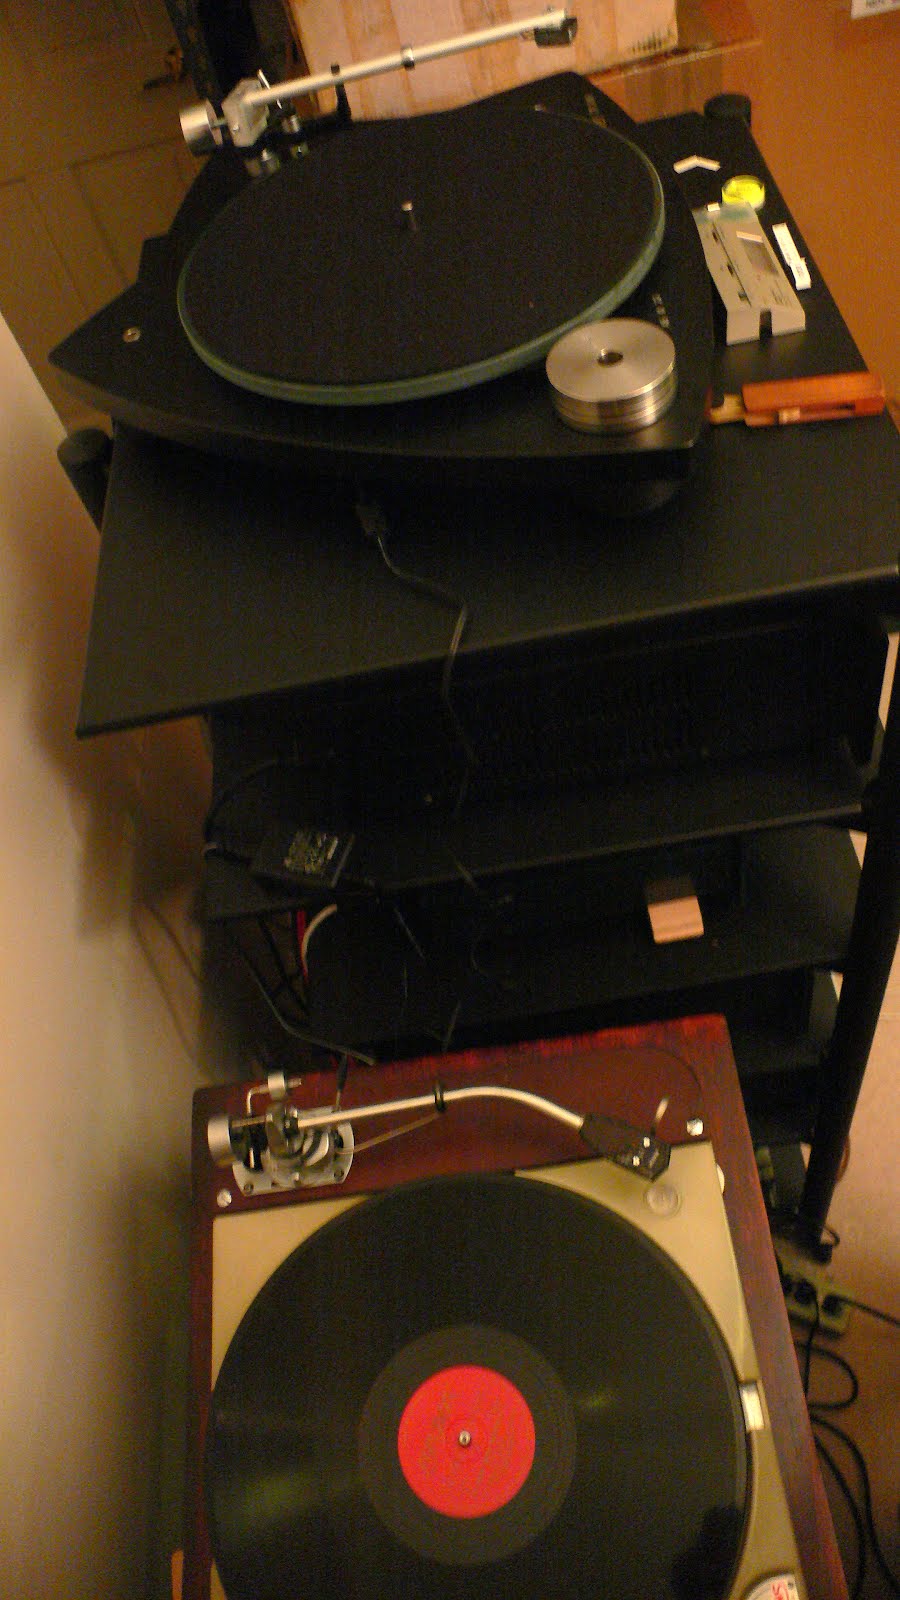 Thorens Td 124 Review